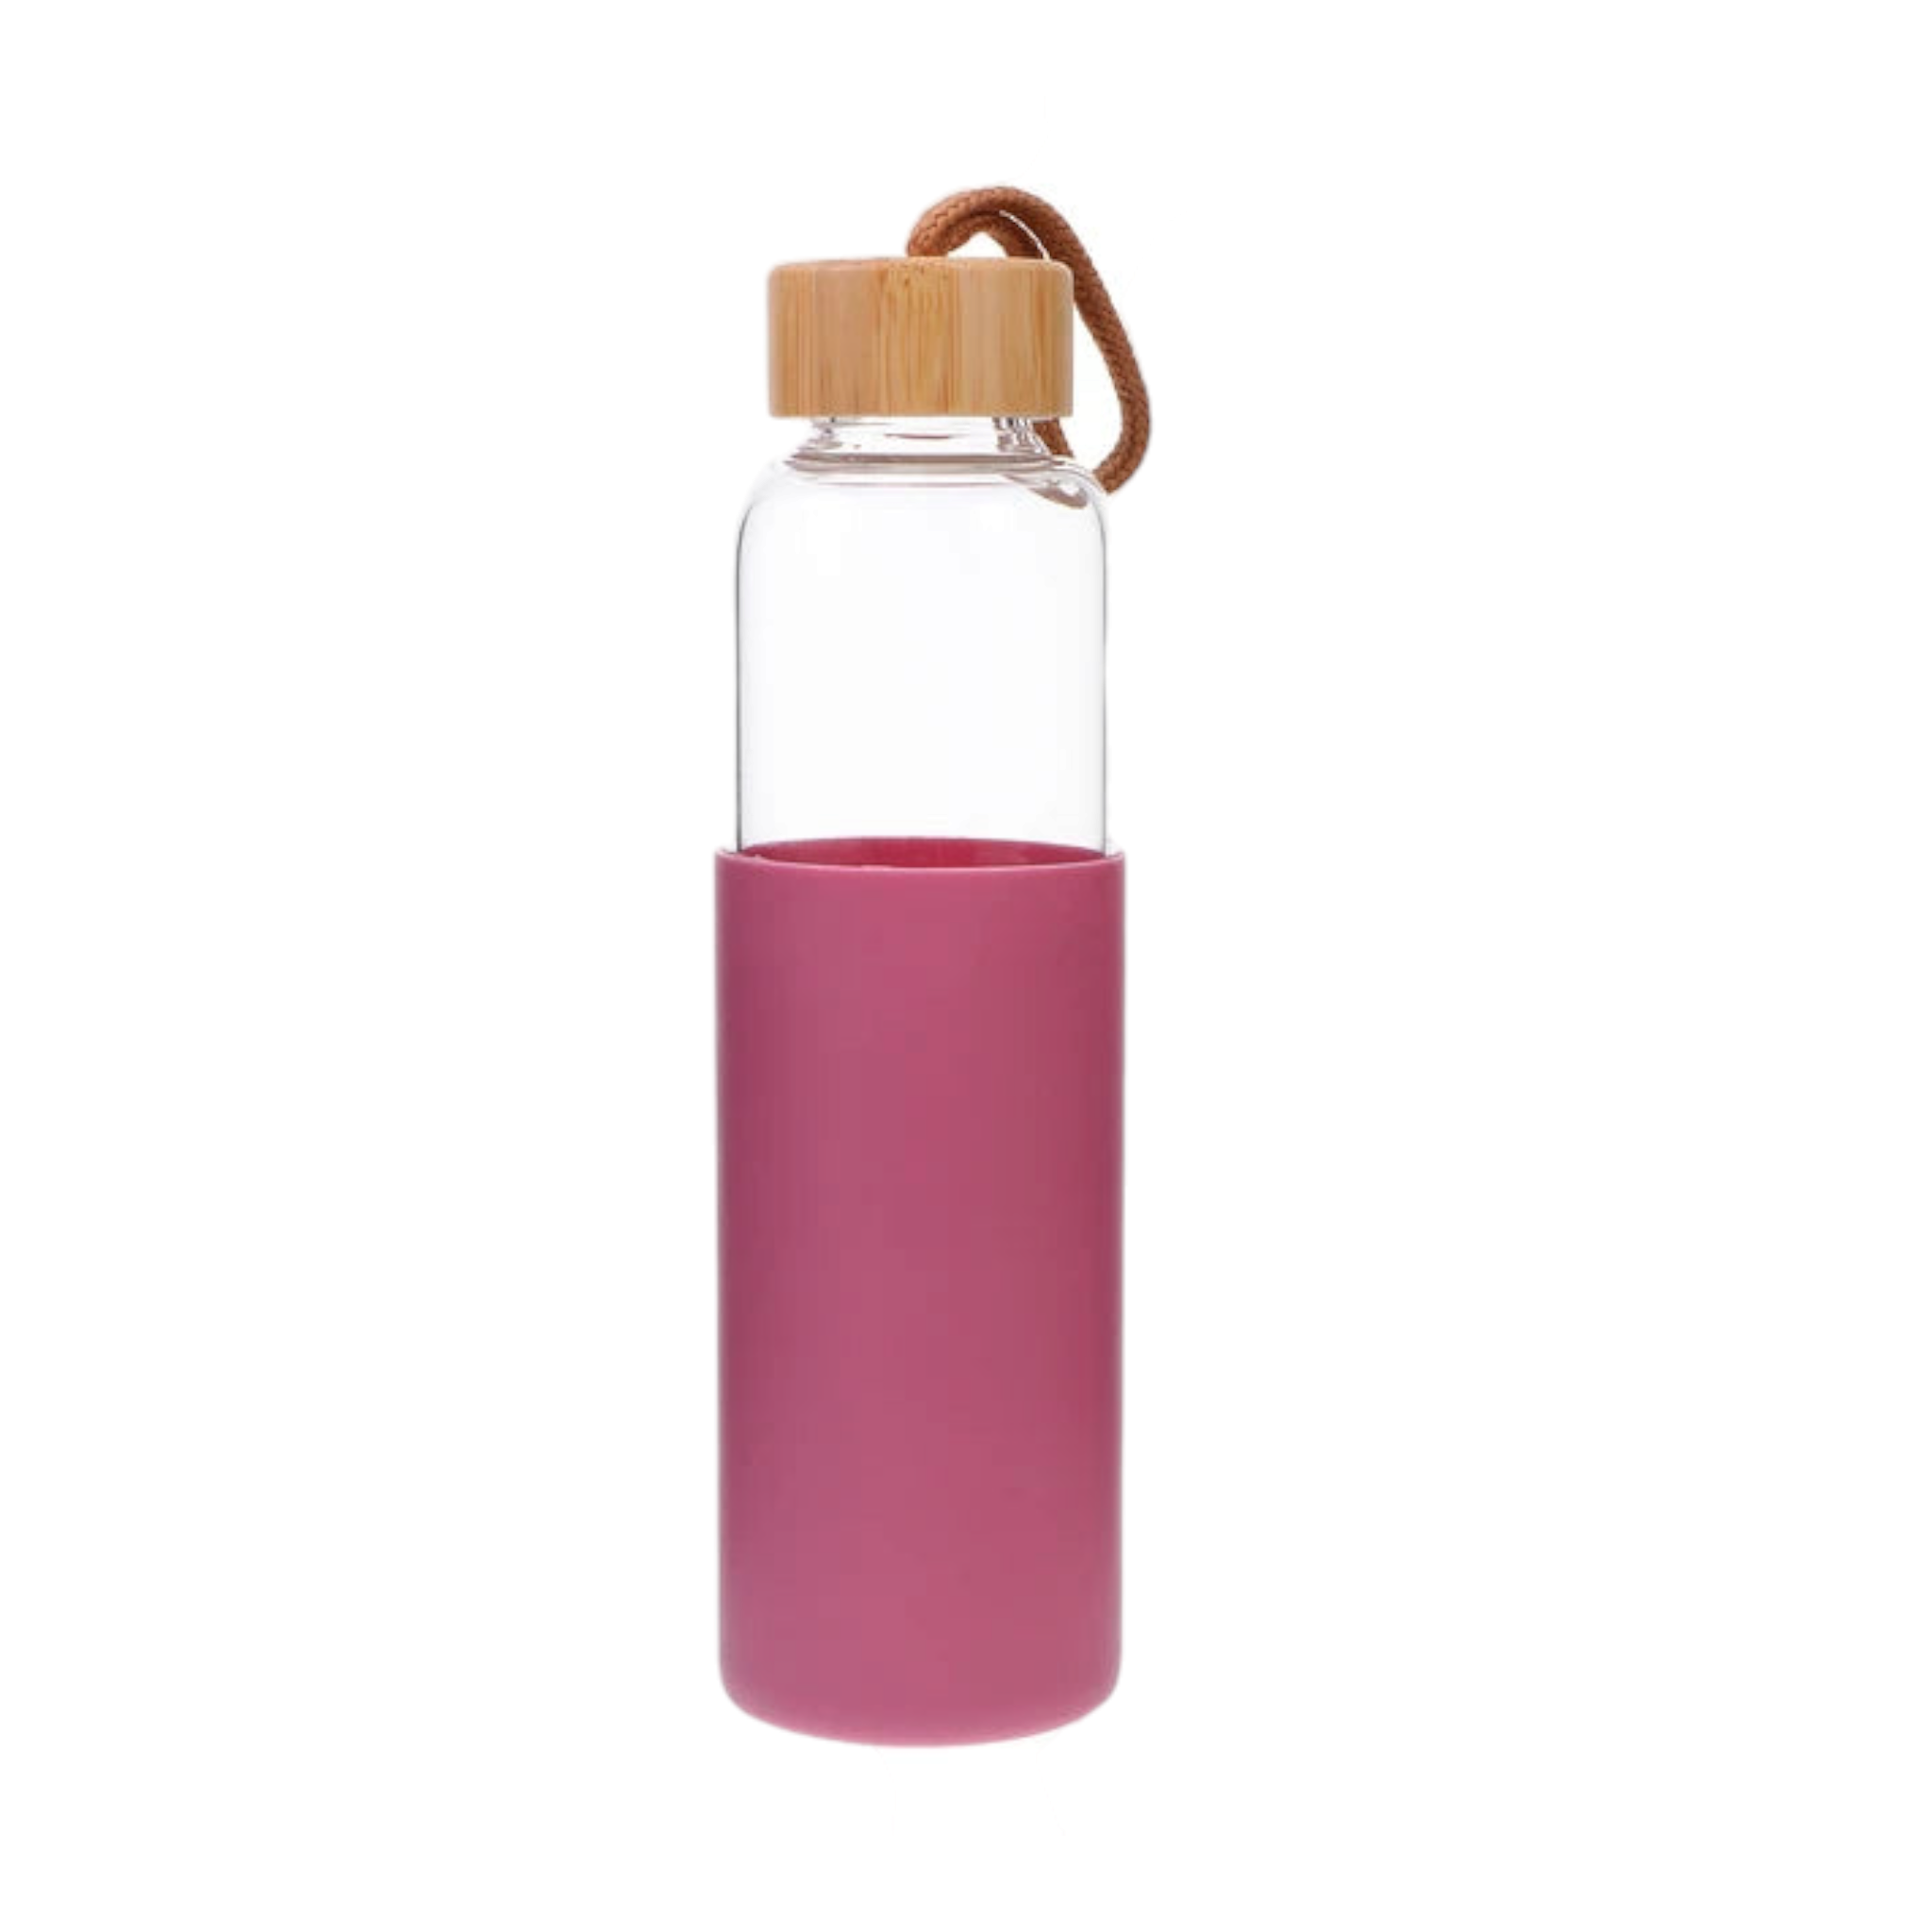 Glass Drinking Bottle 500ml Silicone Grip with Bamboo Wooden Lid and String 22583